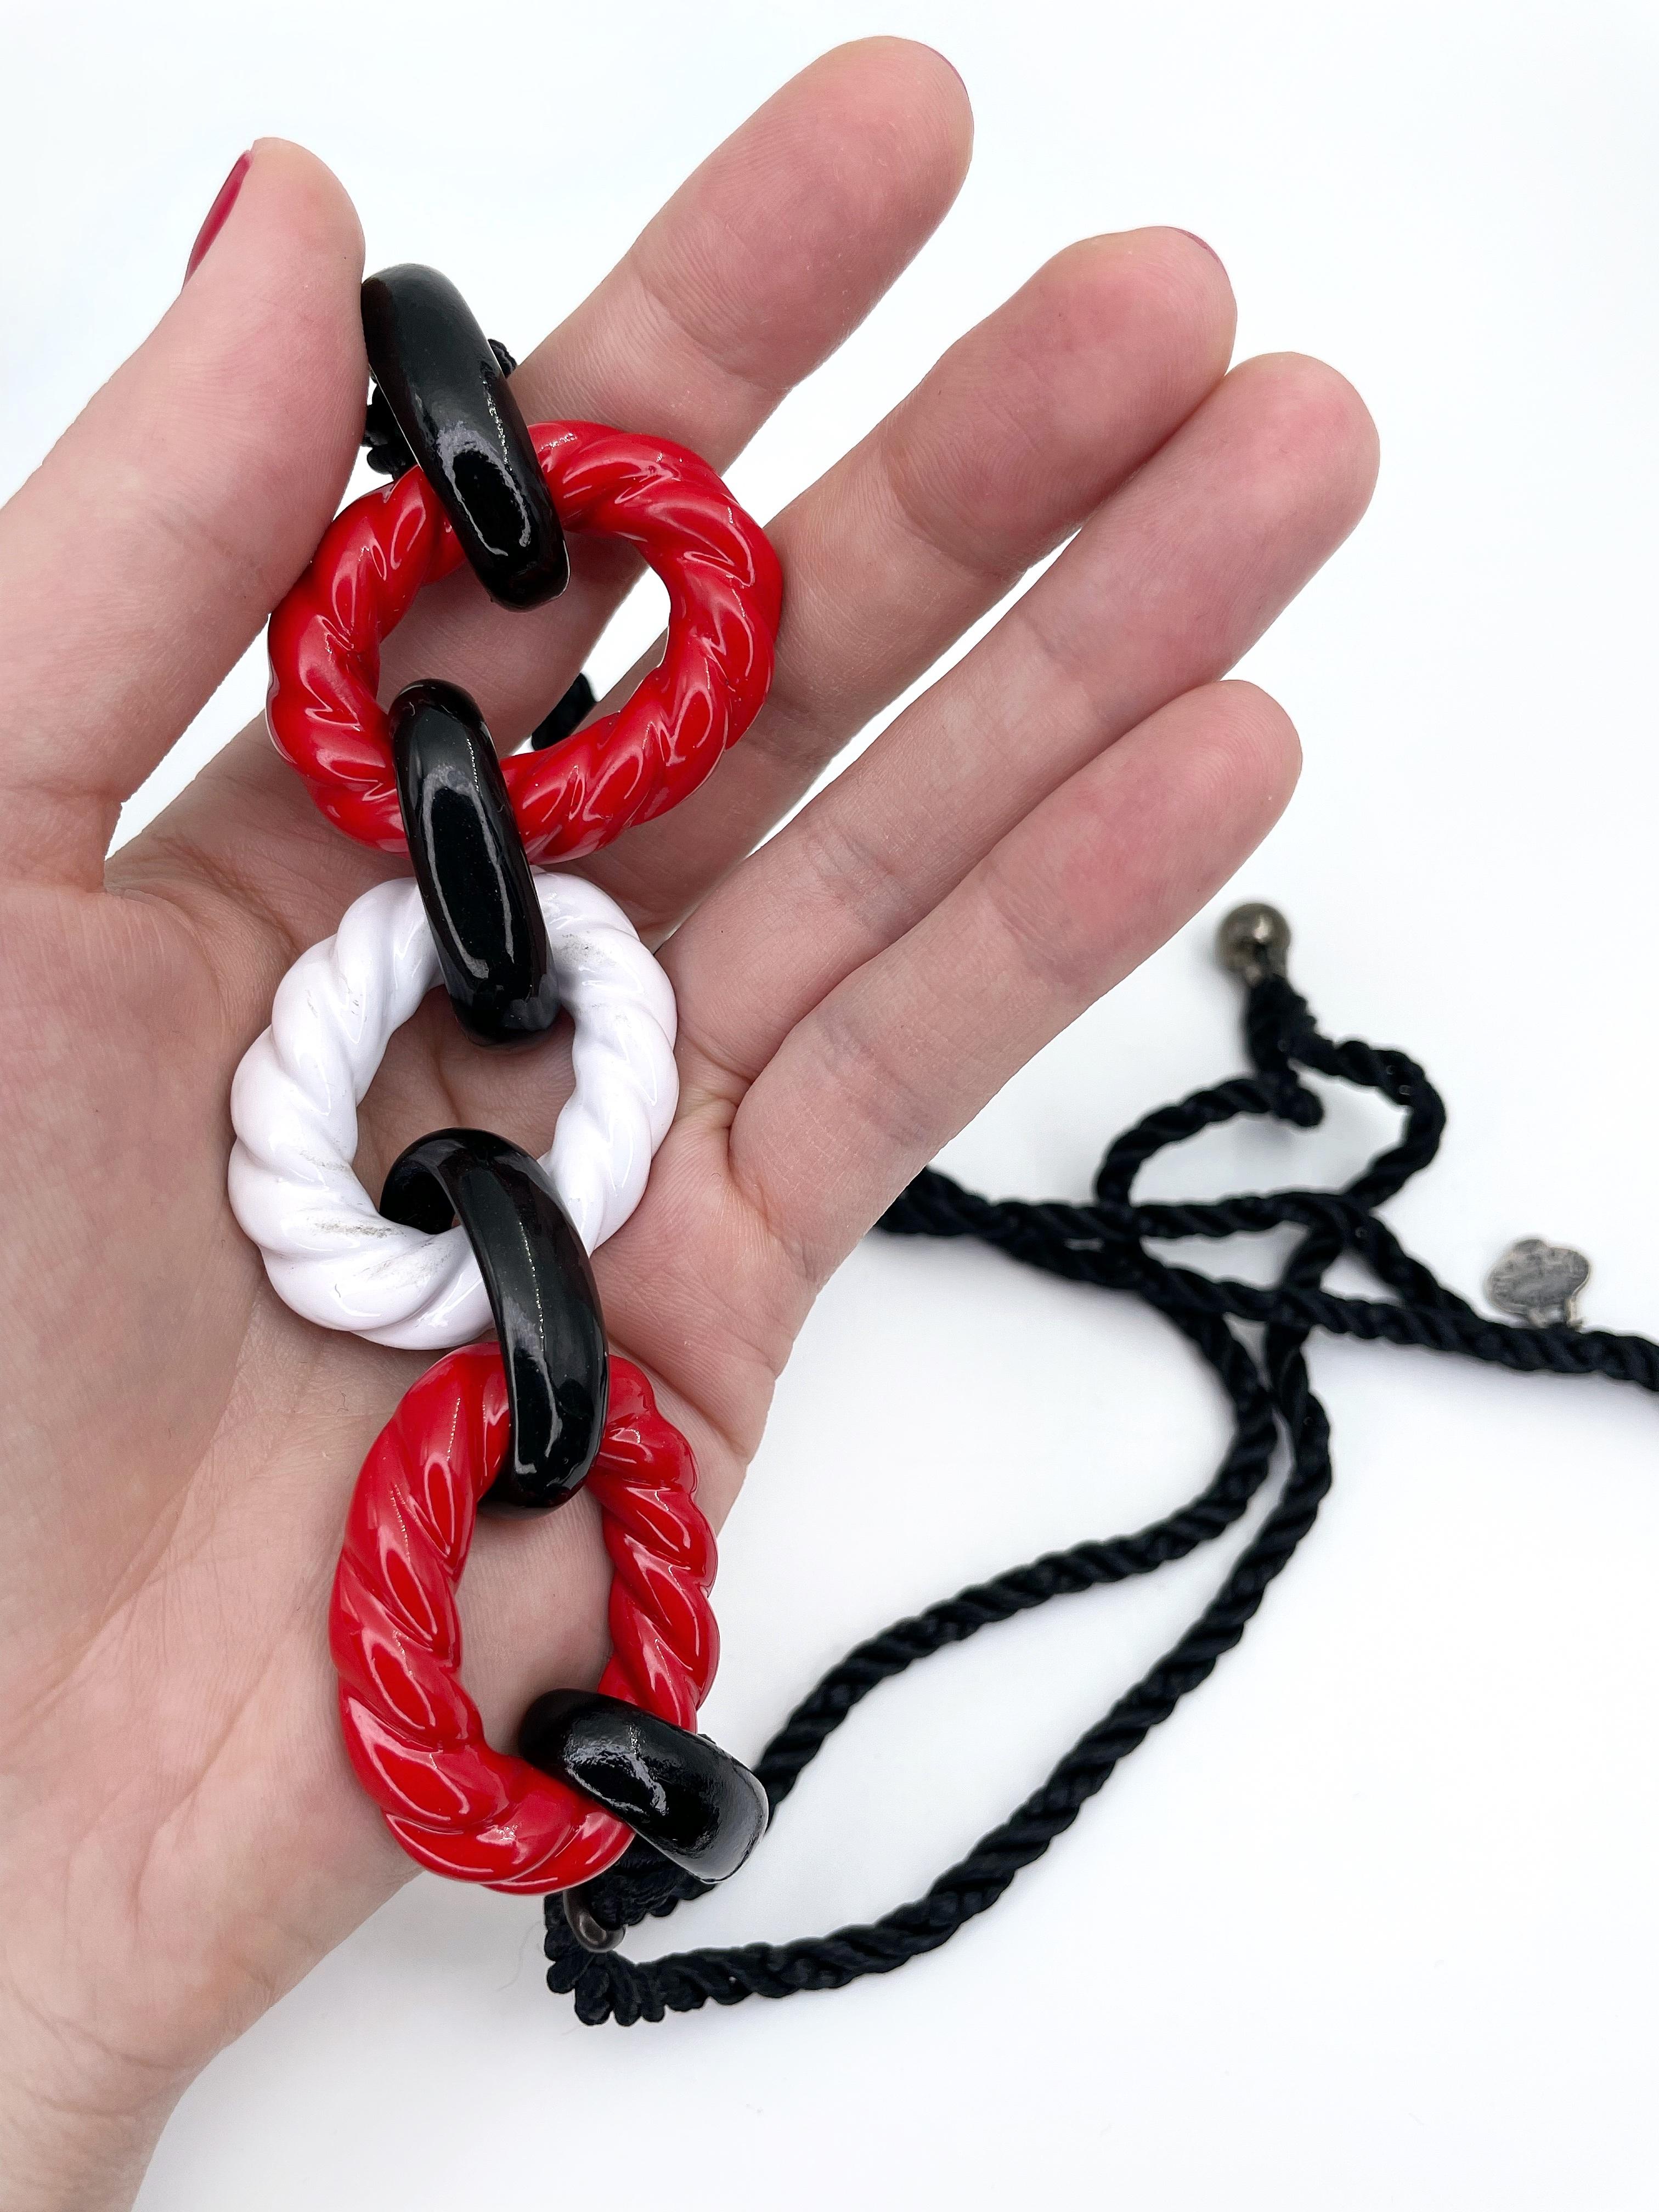 This is a colourful nautical design rope necklace created by YSL in 1980’s. The piece features red, white and black enamelled metal link details in the centre. The black twisted silk cord is finished with beads. 

Signed: “Yves Saint Laurent - Rive